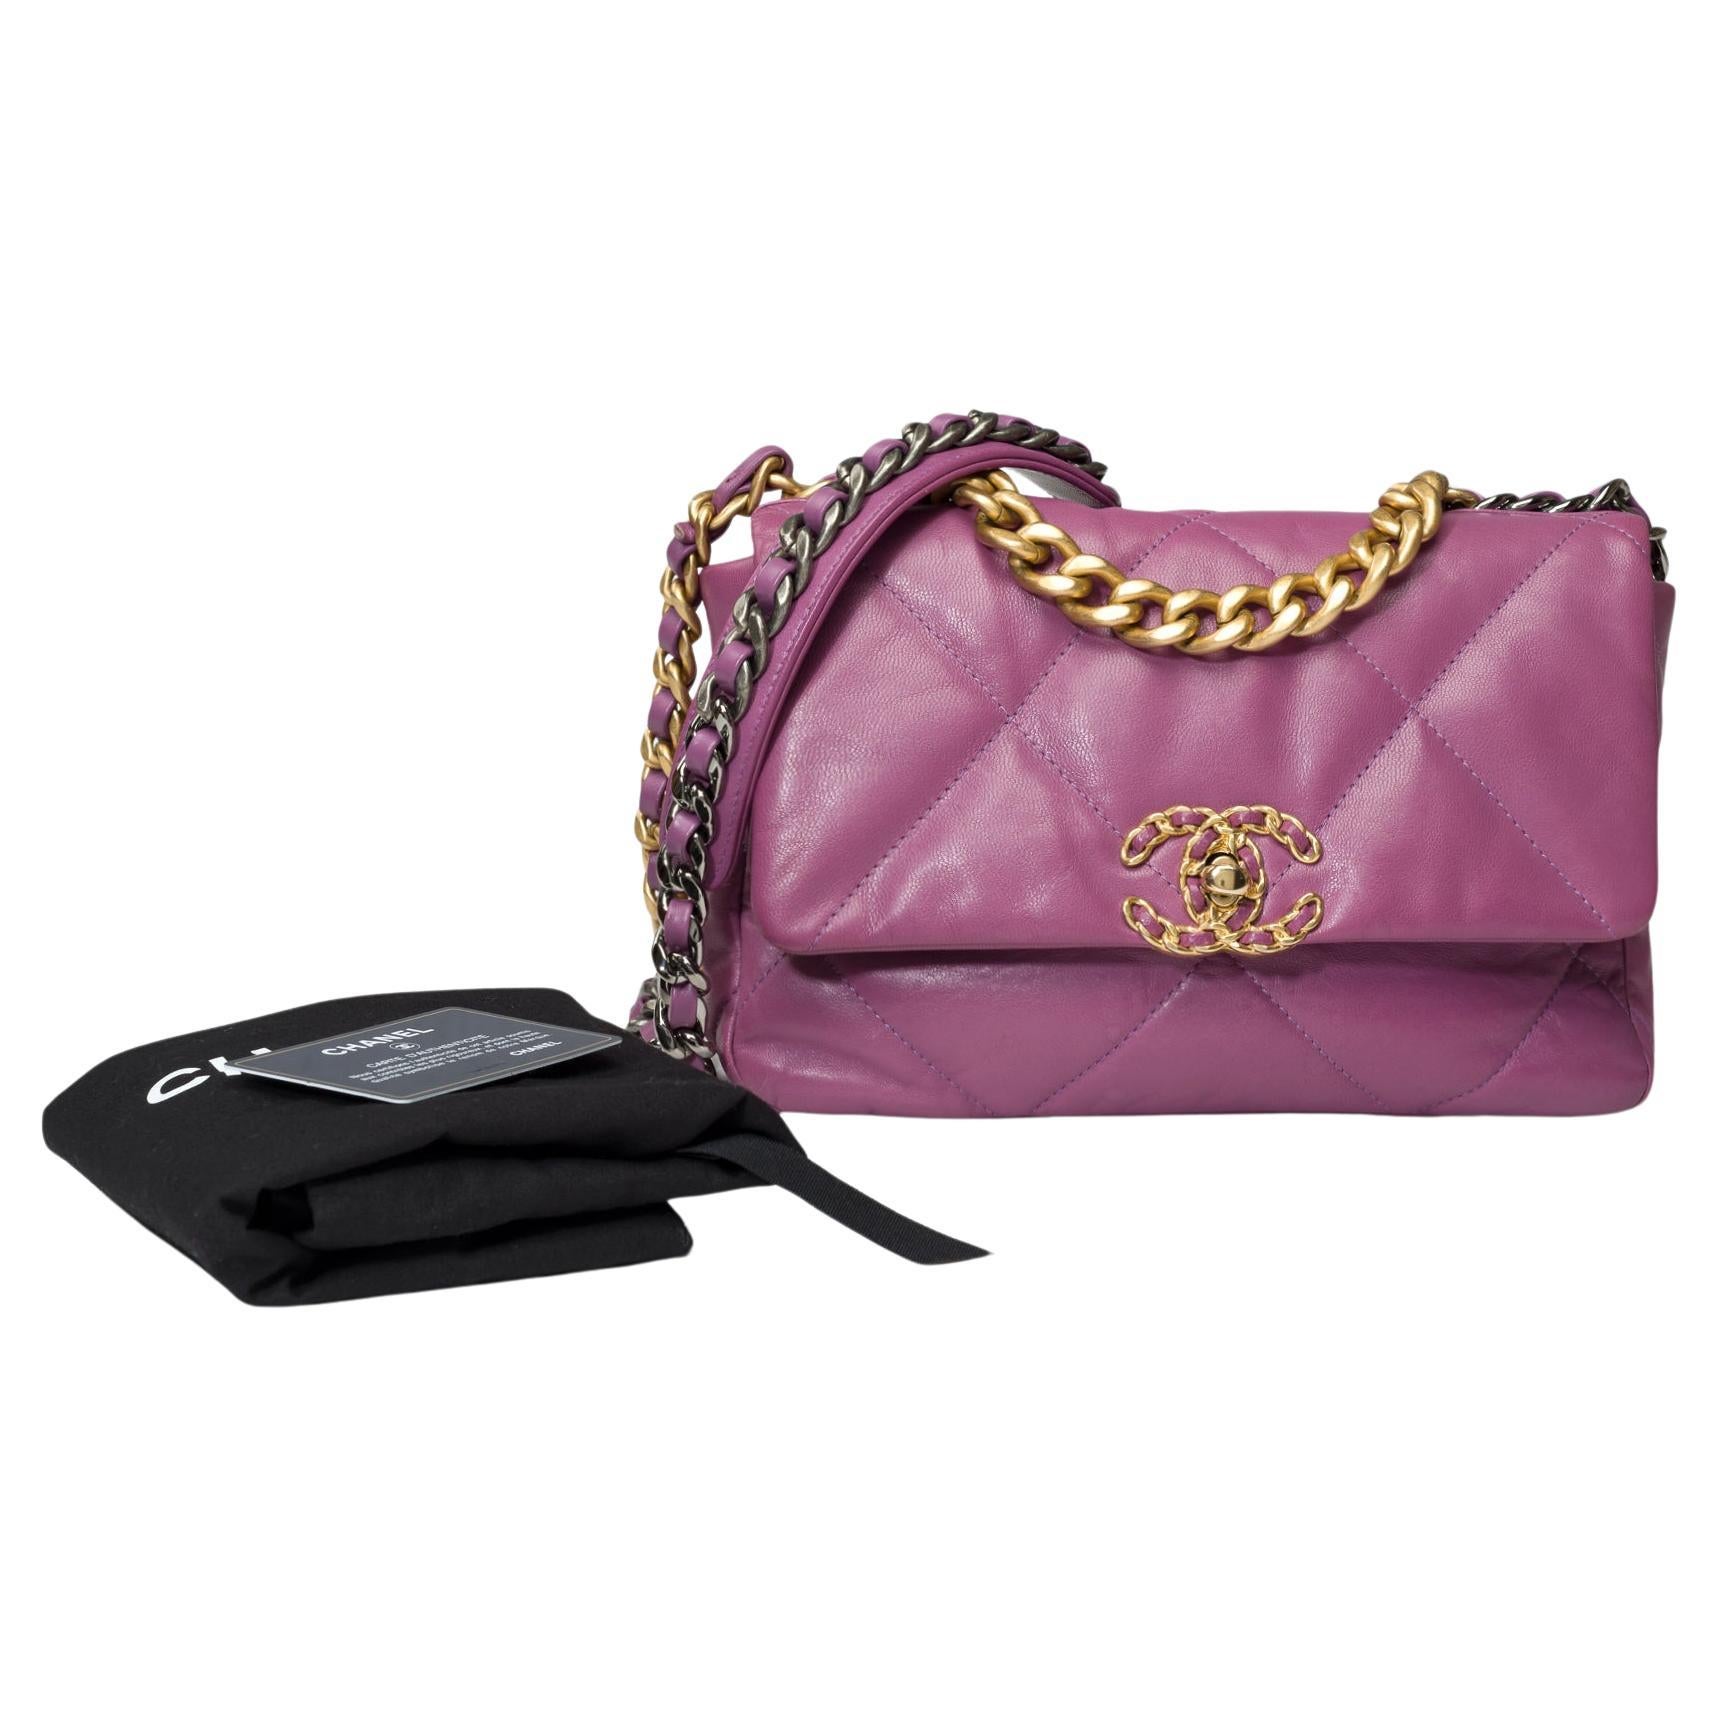 Stunning Chanel 19 shoulder bag in purple quilted leather , Matt gold and SHW For Sale